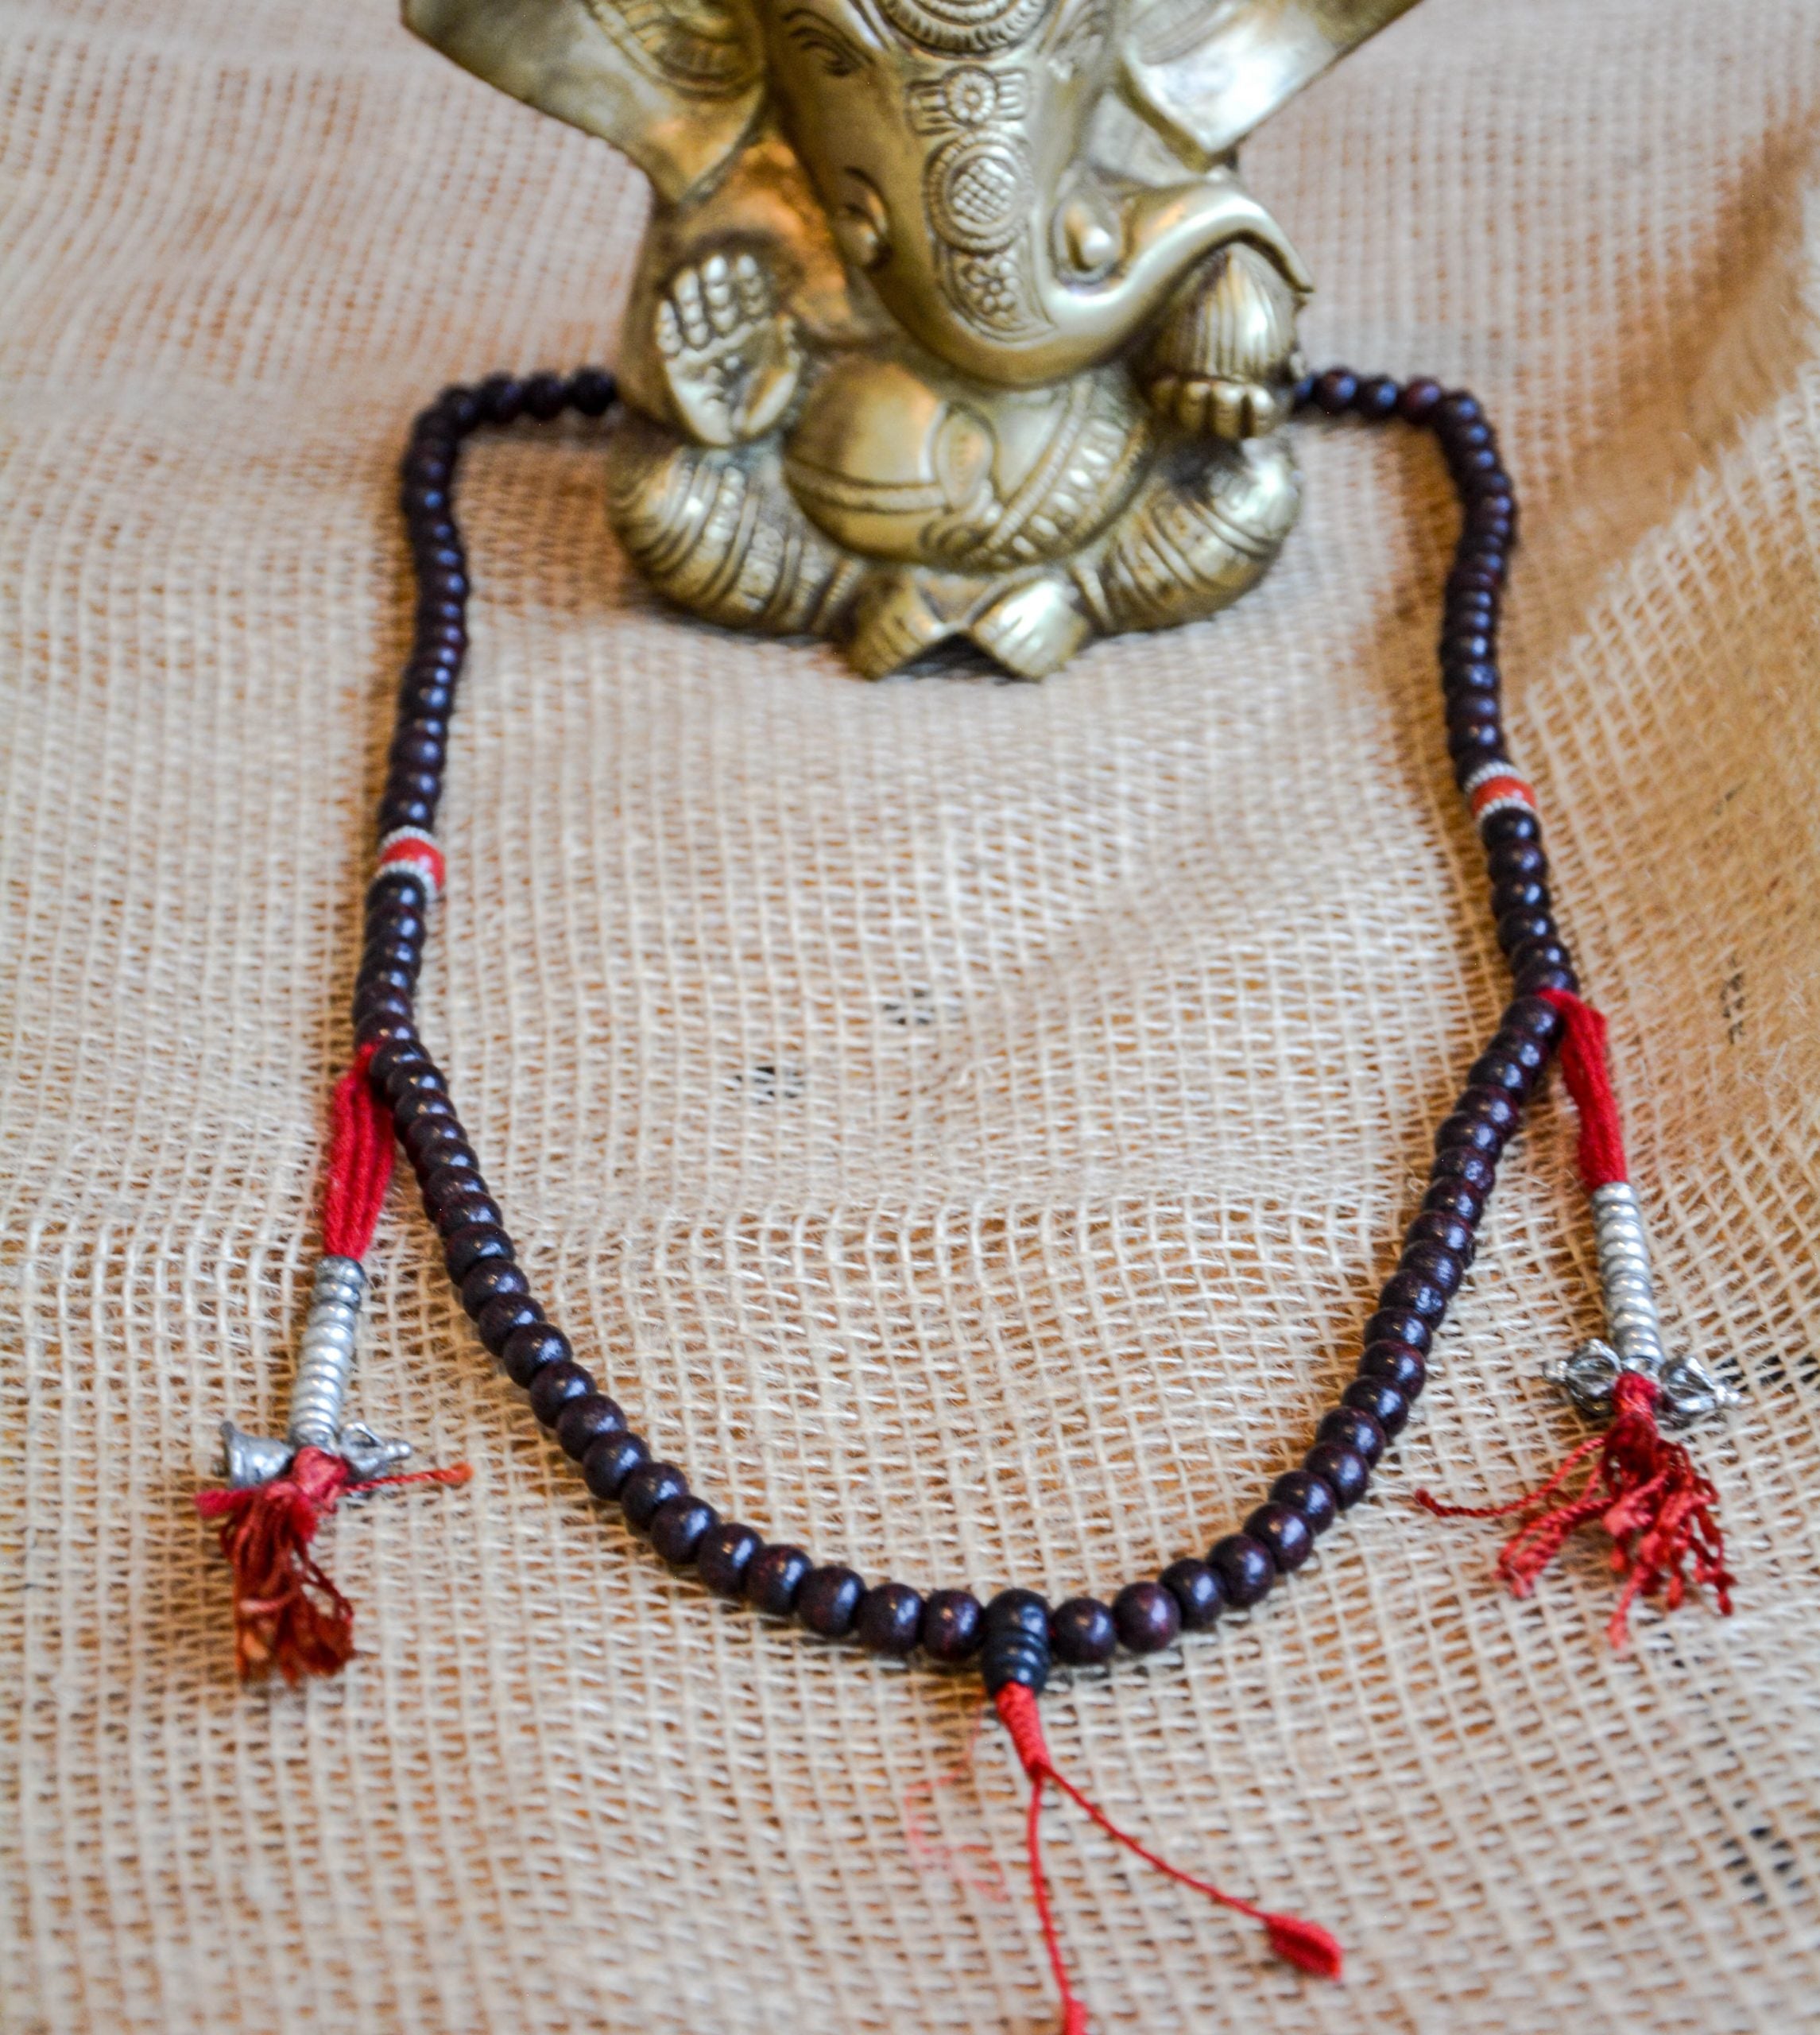 Rosewood Mala Prayer Beads - With Dorje Counter And Coral